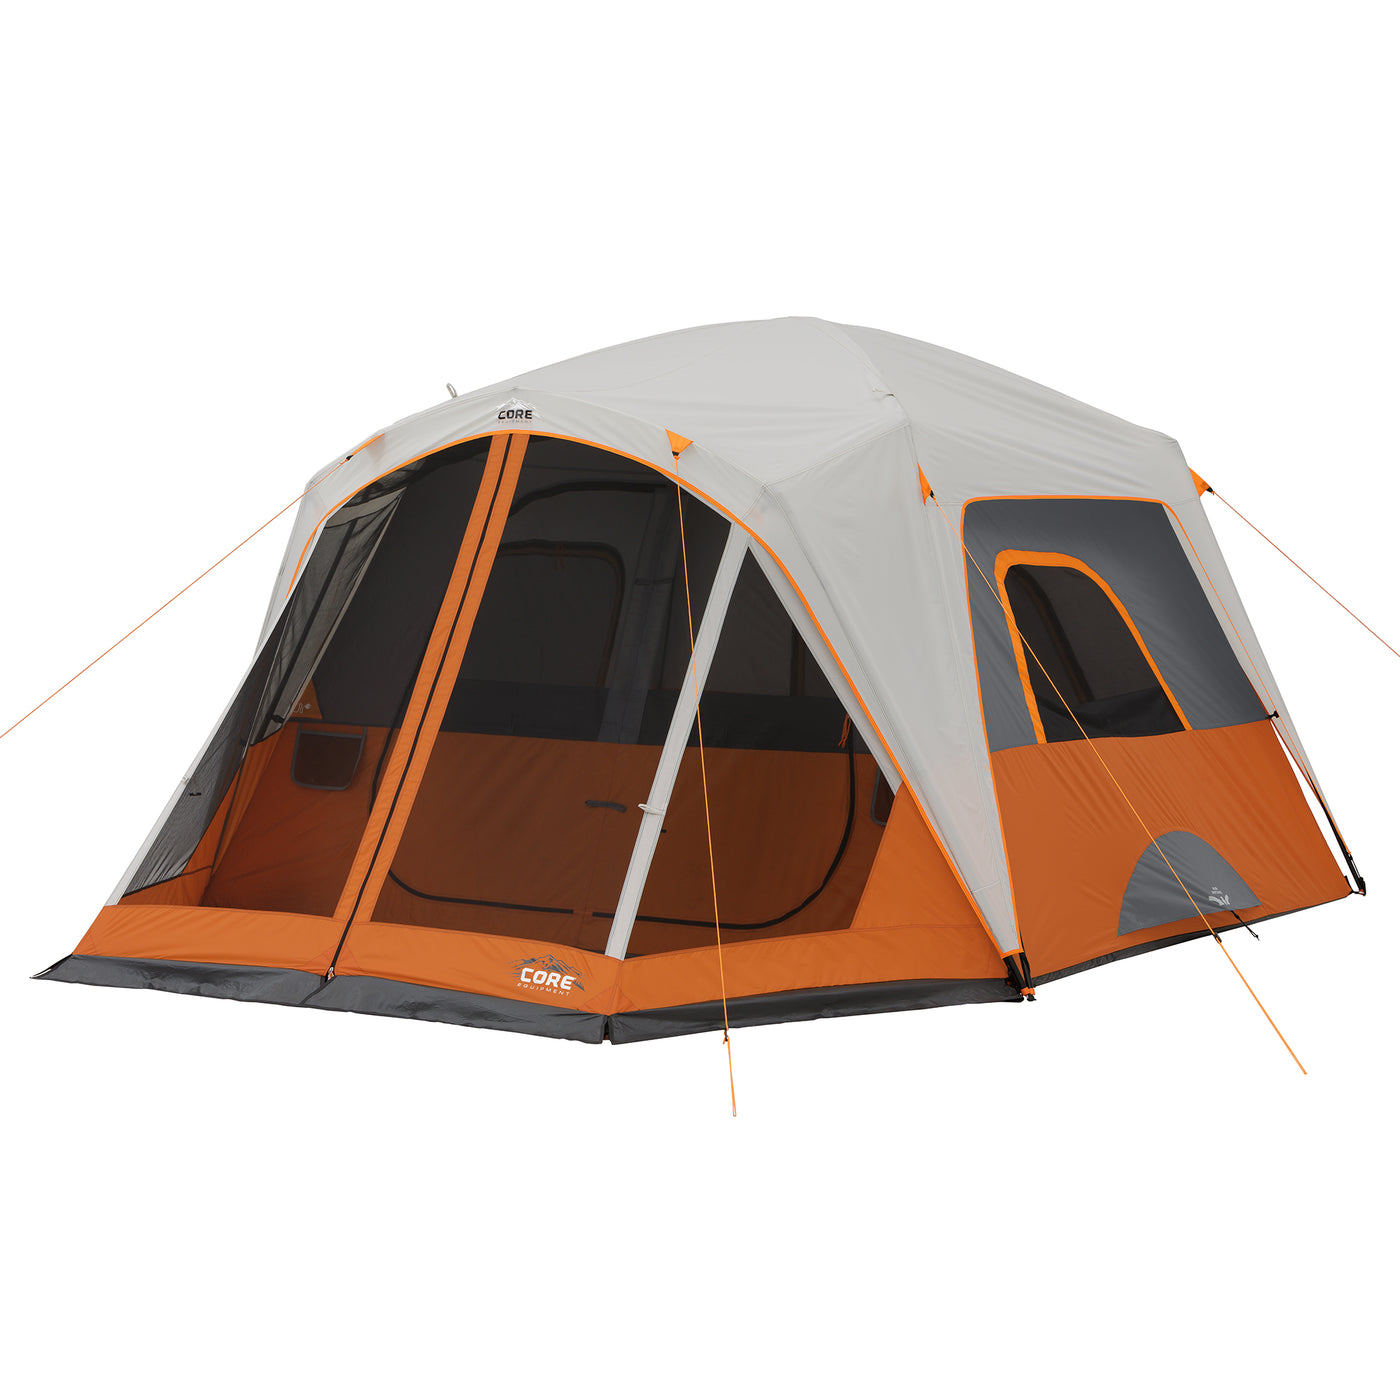 CORE Straight Wall 14 ft. x 10 ft. 10-Person Cabin Tent with 2